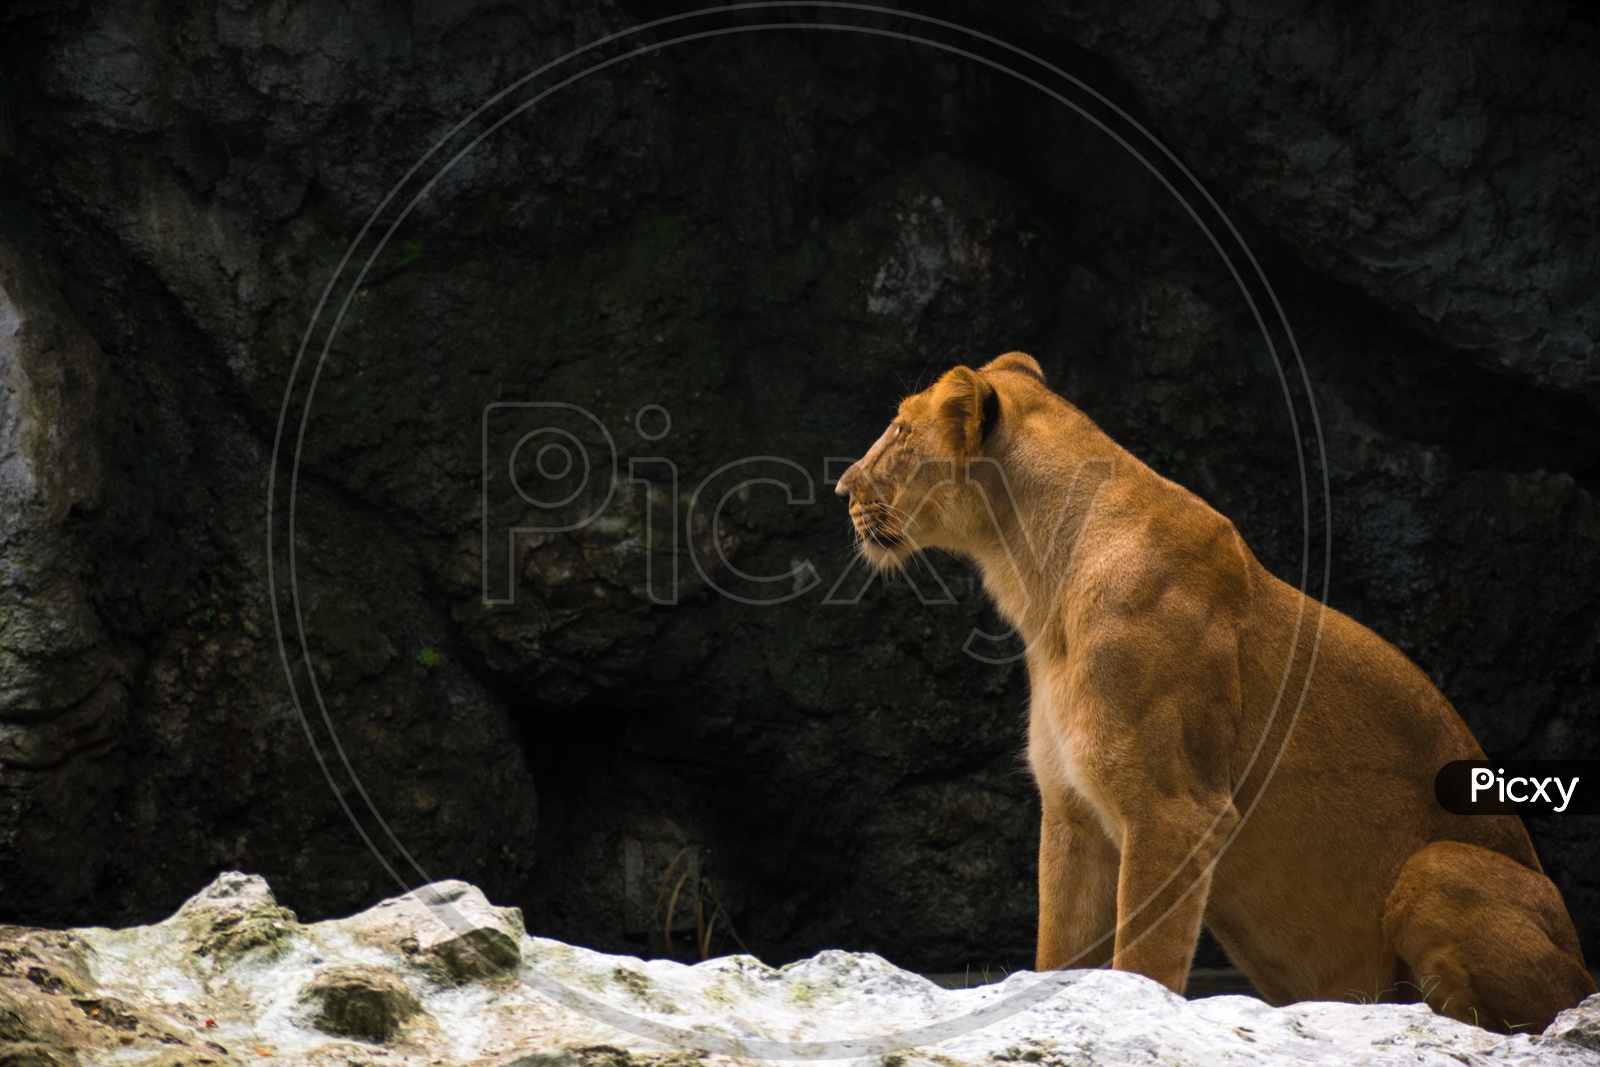 Lioness in Zoological Garden